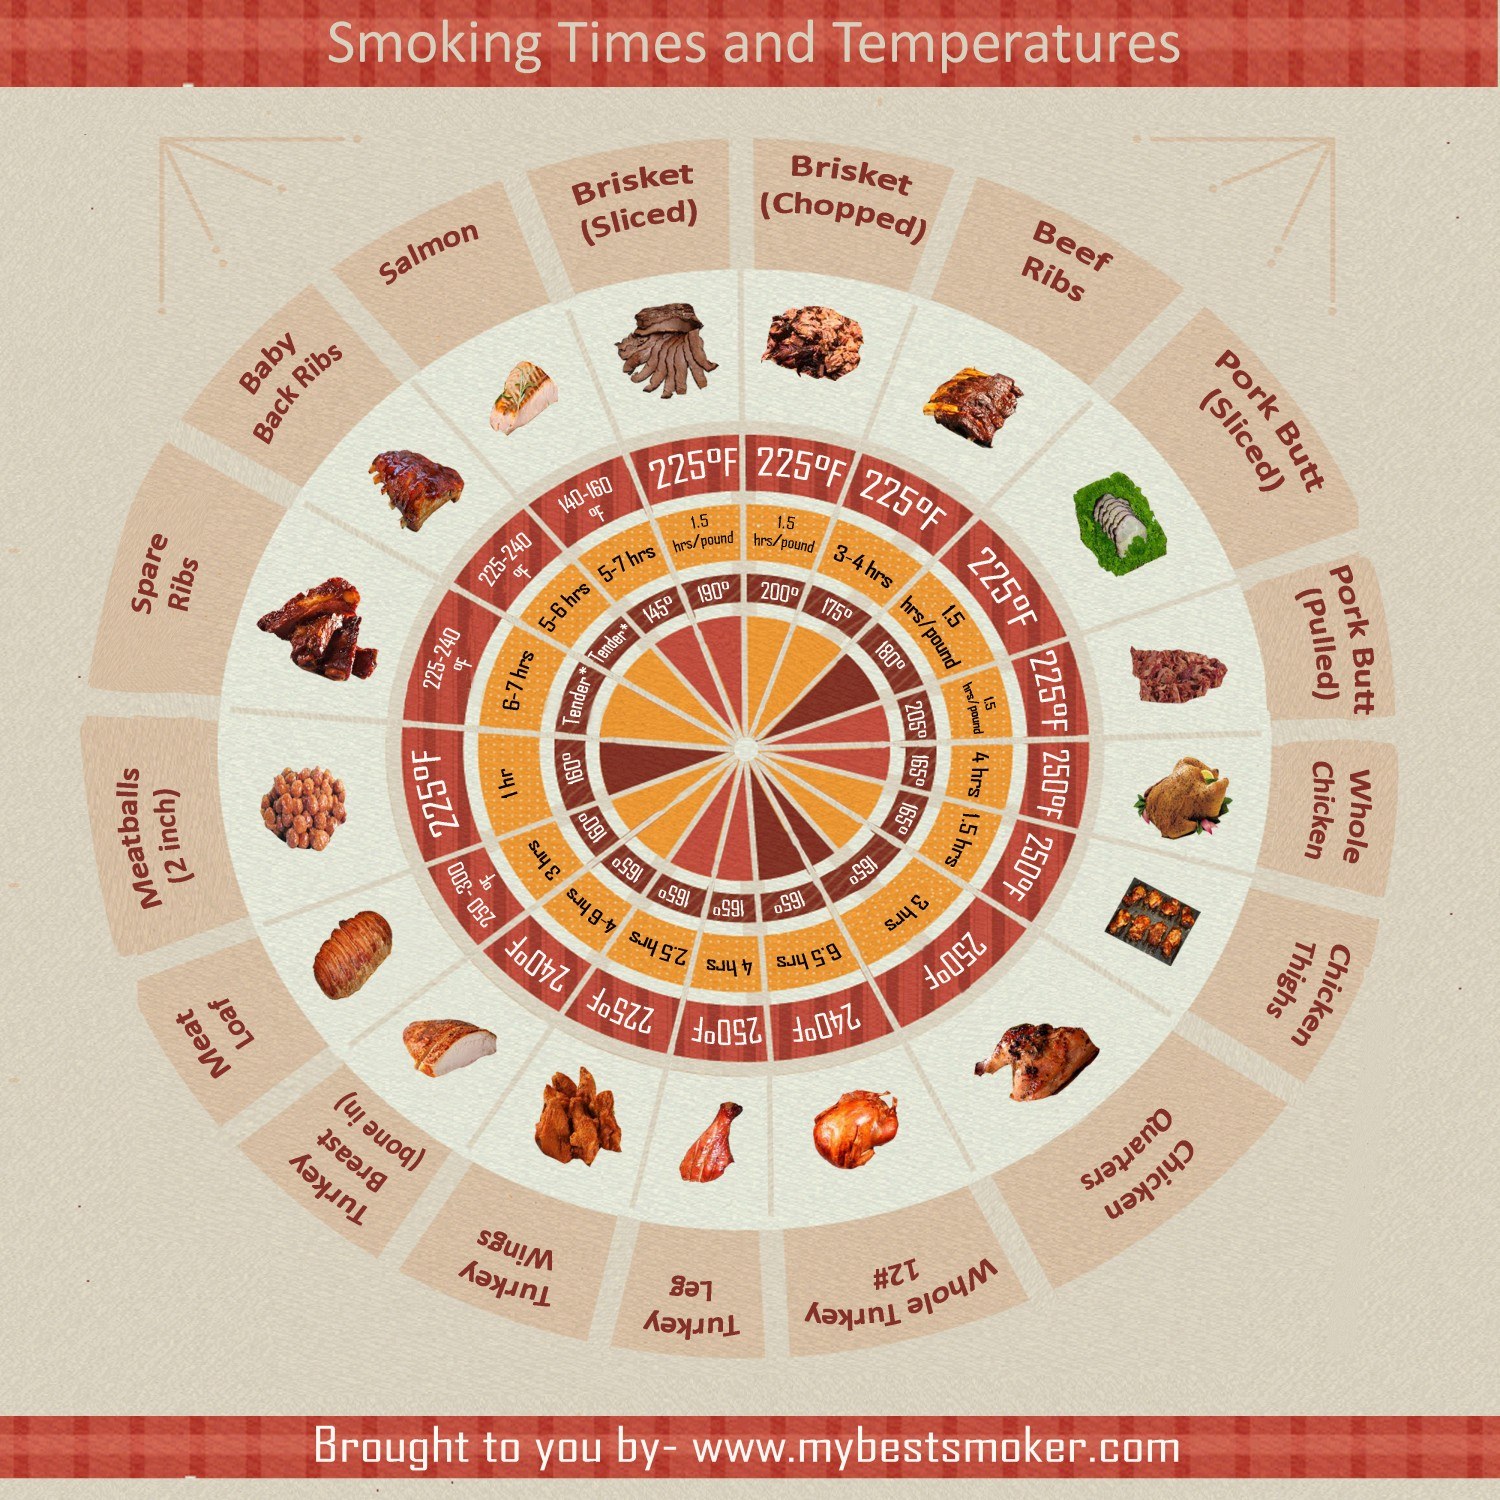 smoking-times-and-temperatures_54eb582b5a392_w1500